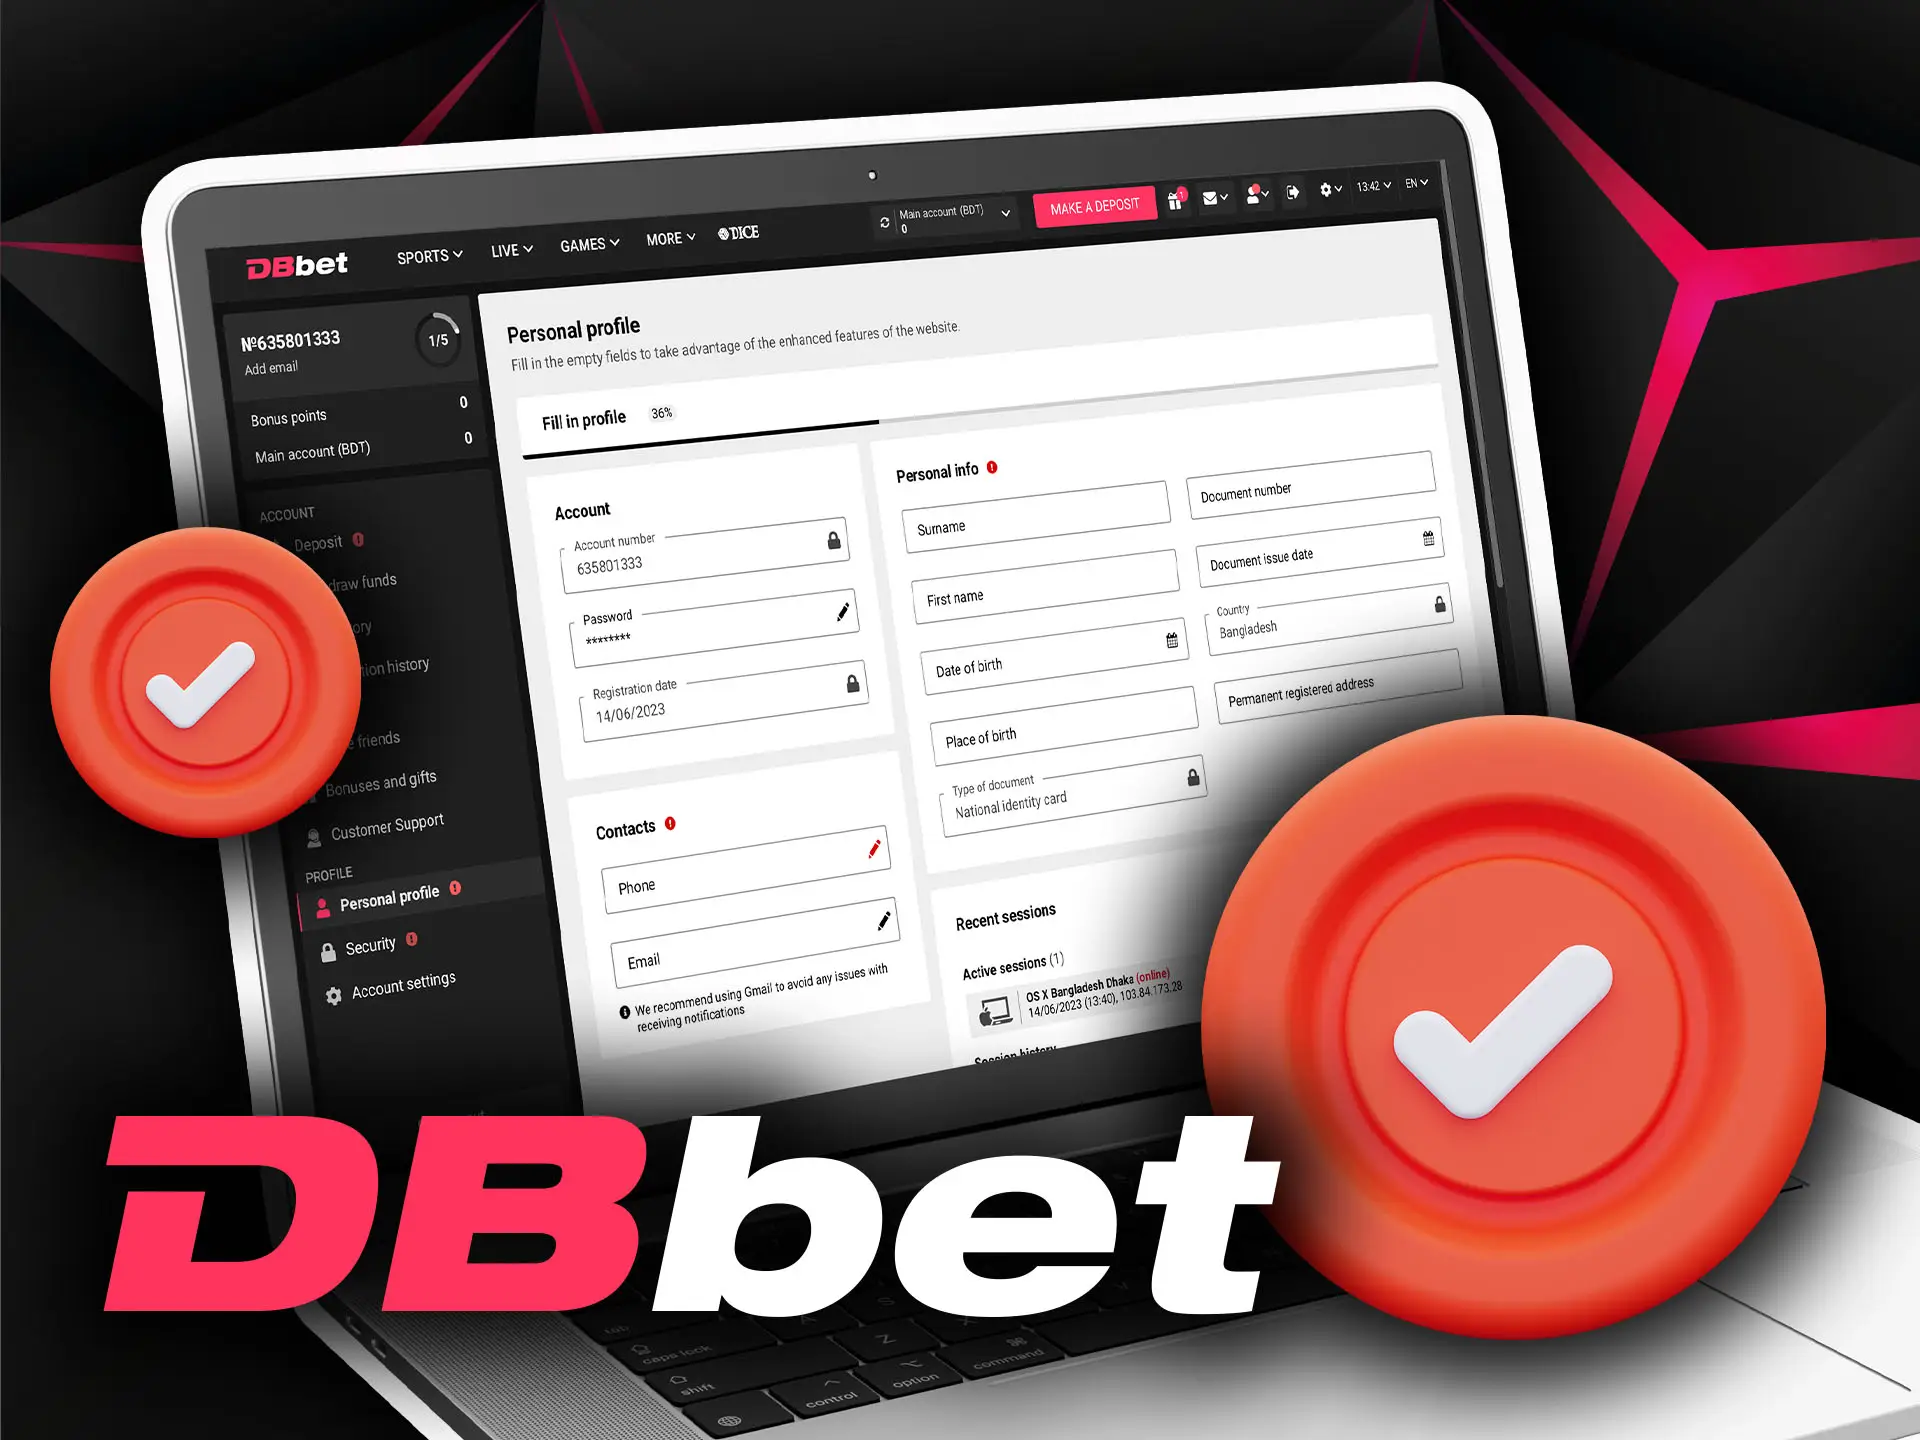 Every new user should verify its account on DBbet.